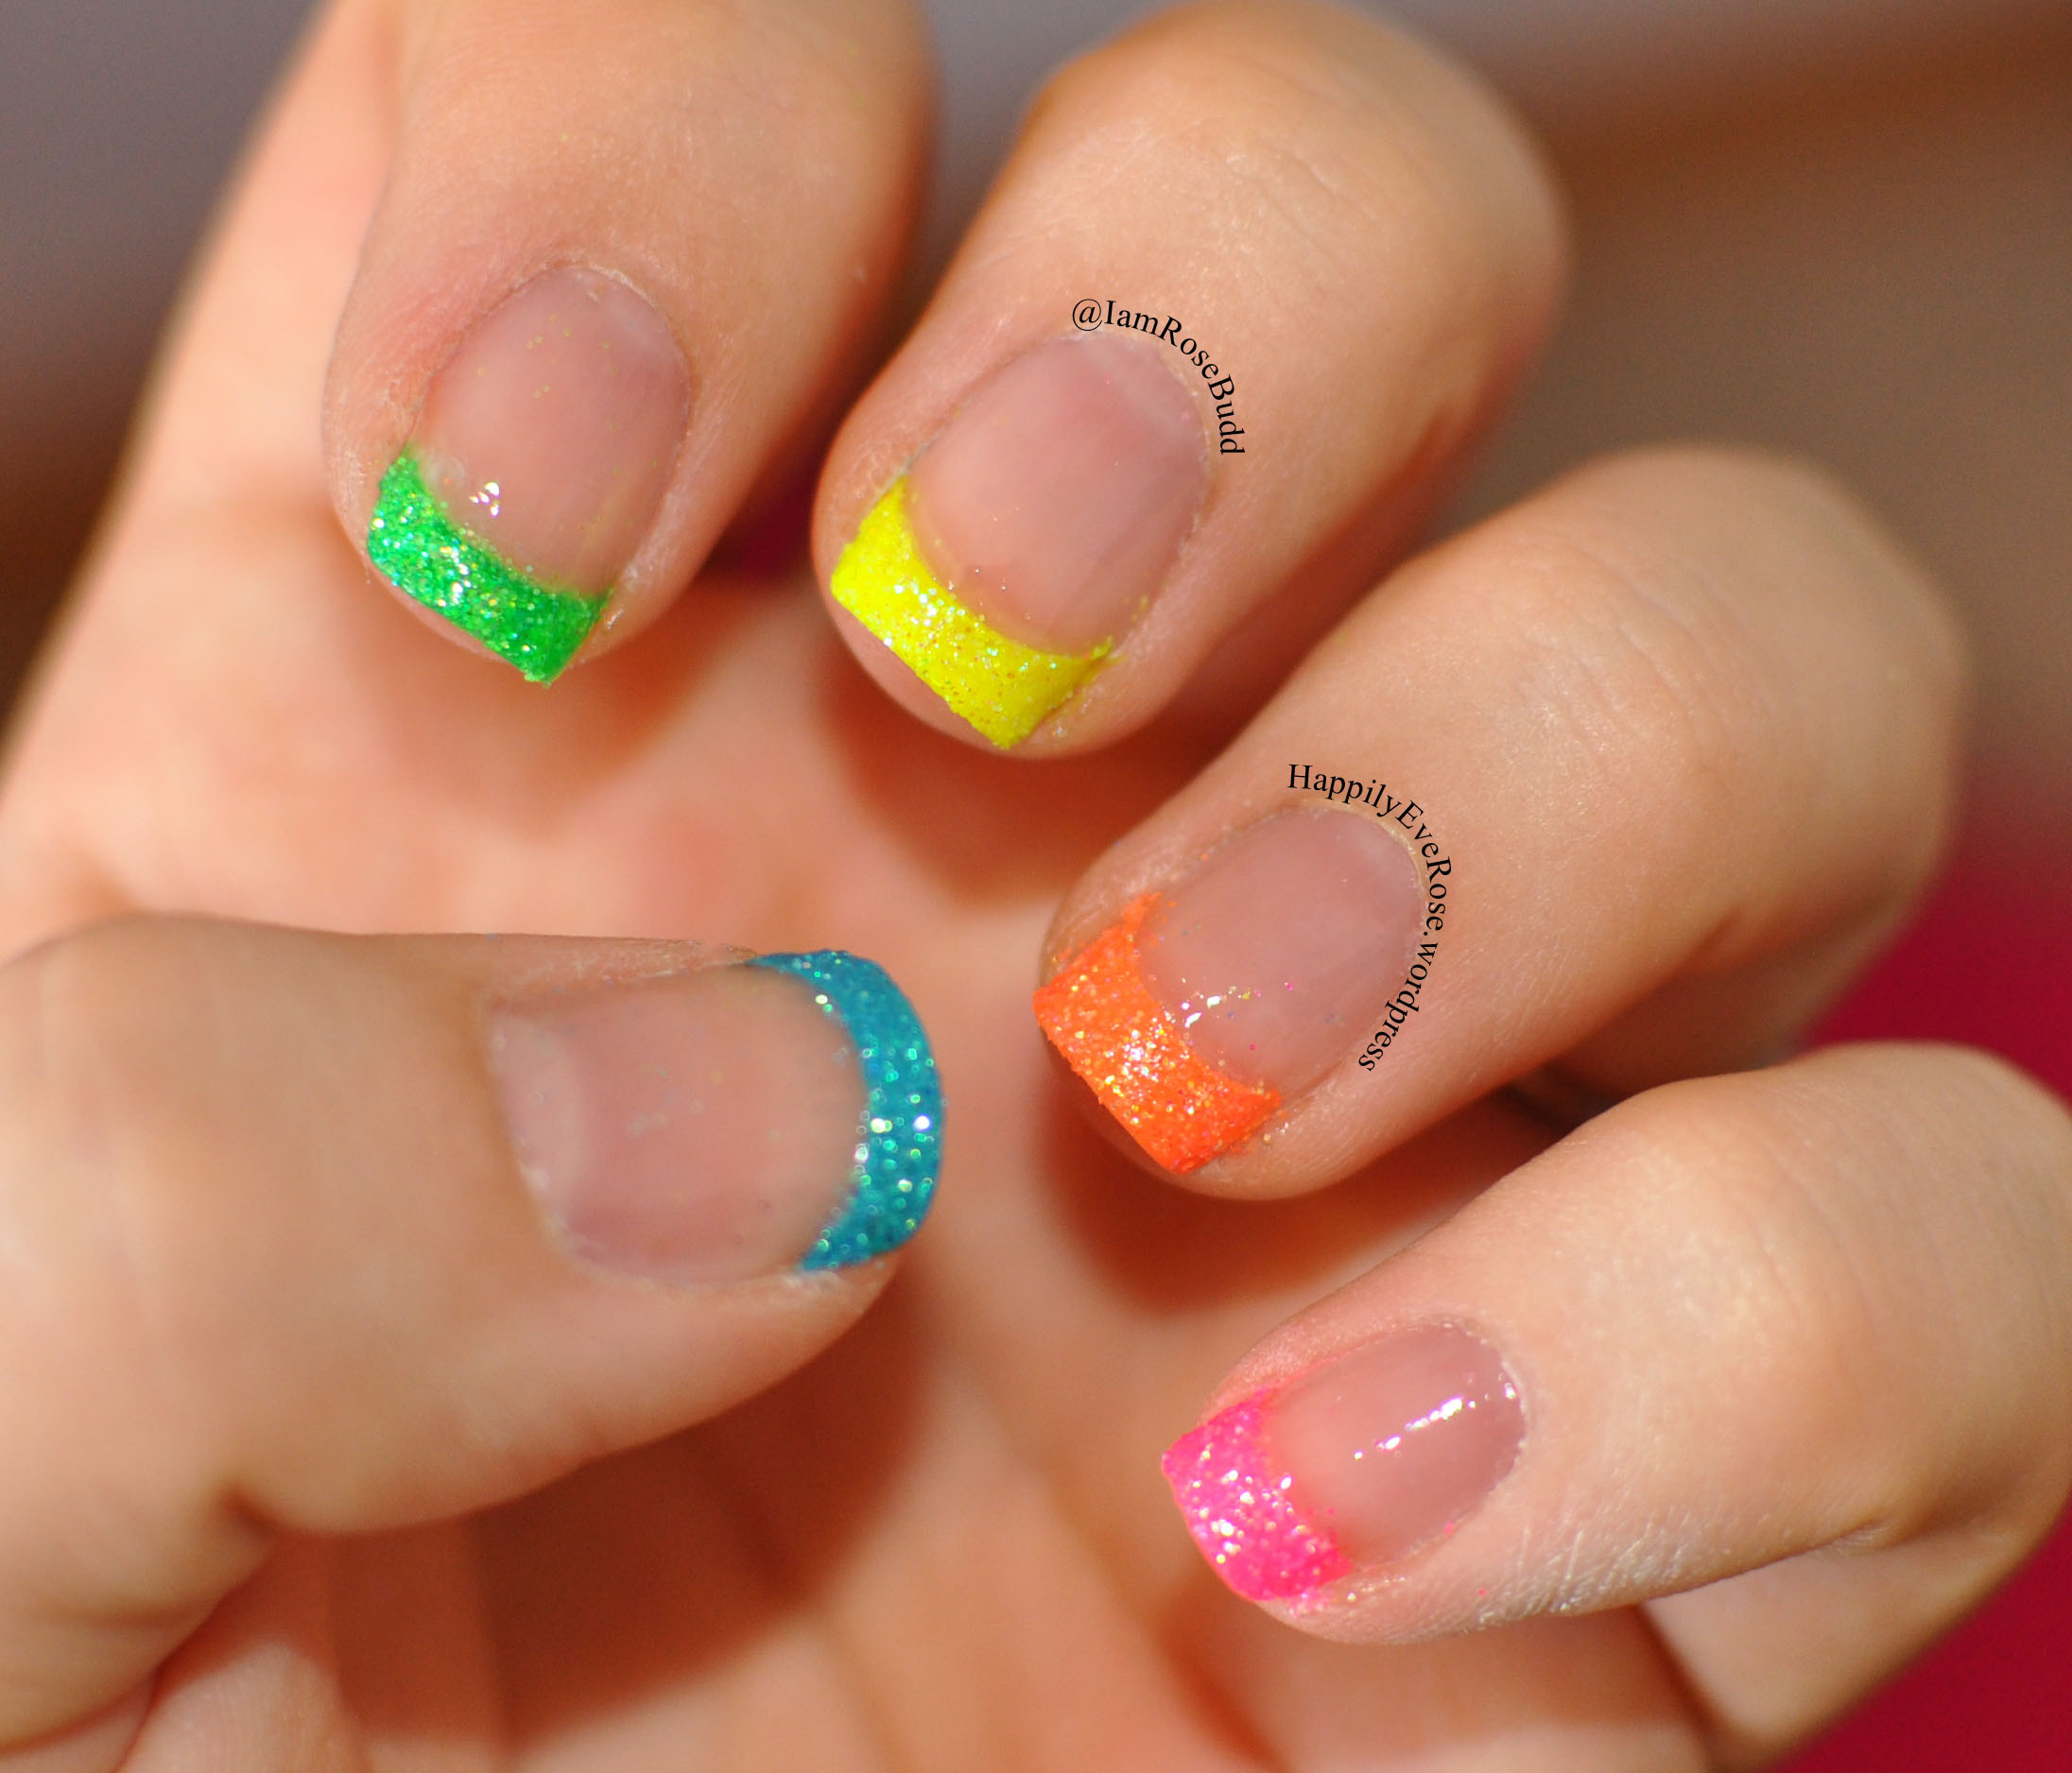 Glitter French Tip Nail Designs
 Neon French tip with animal print and neon glitter